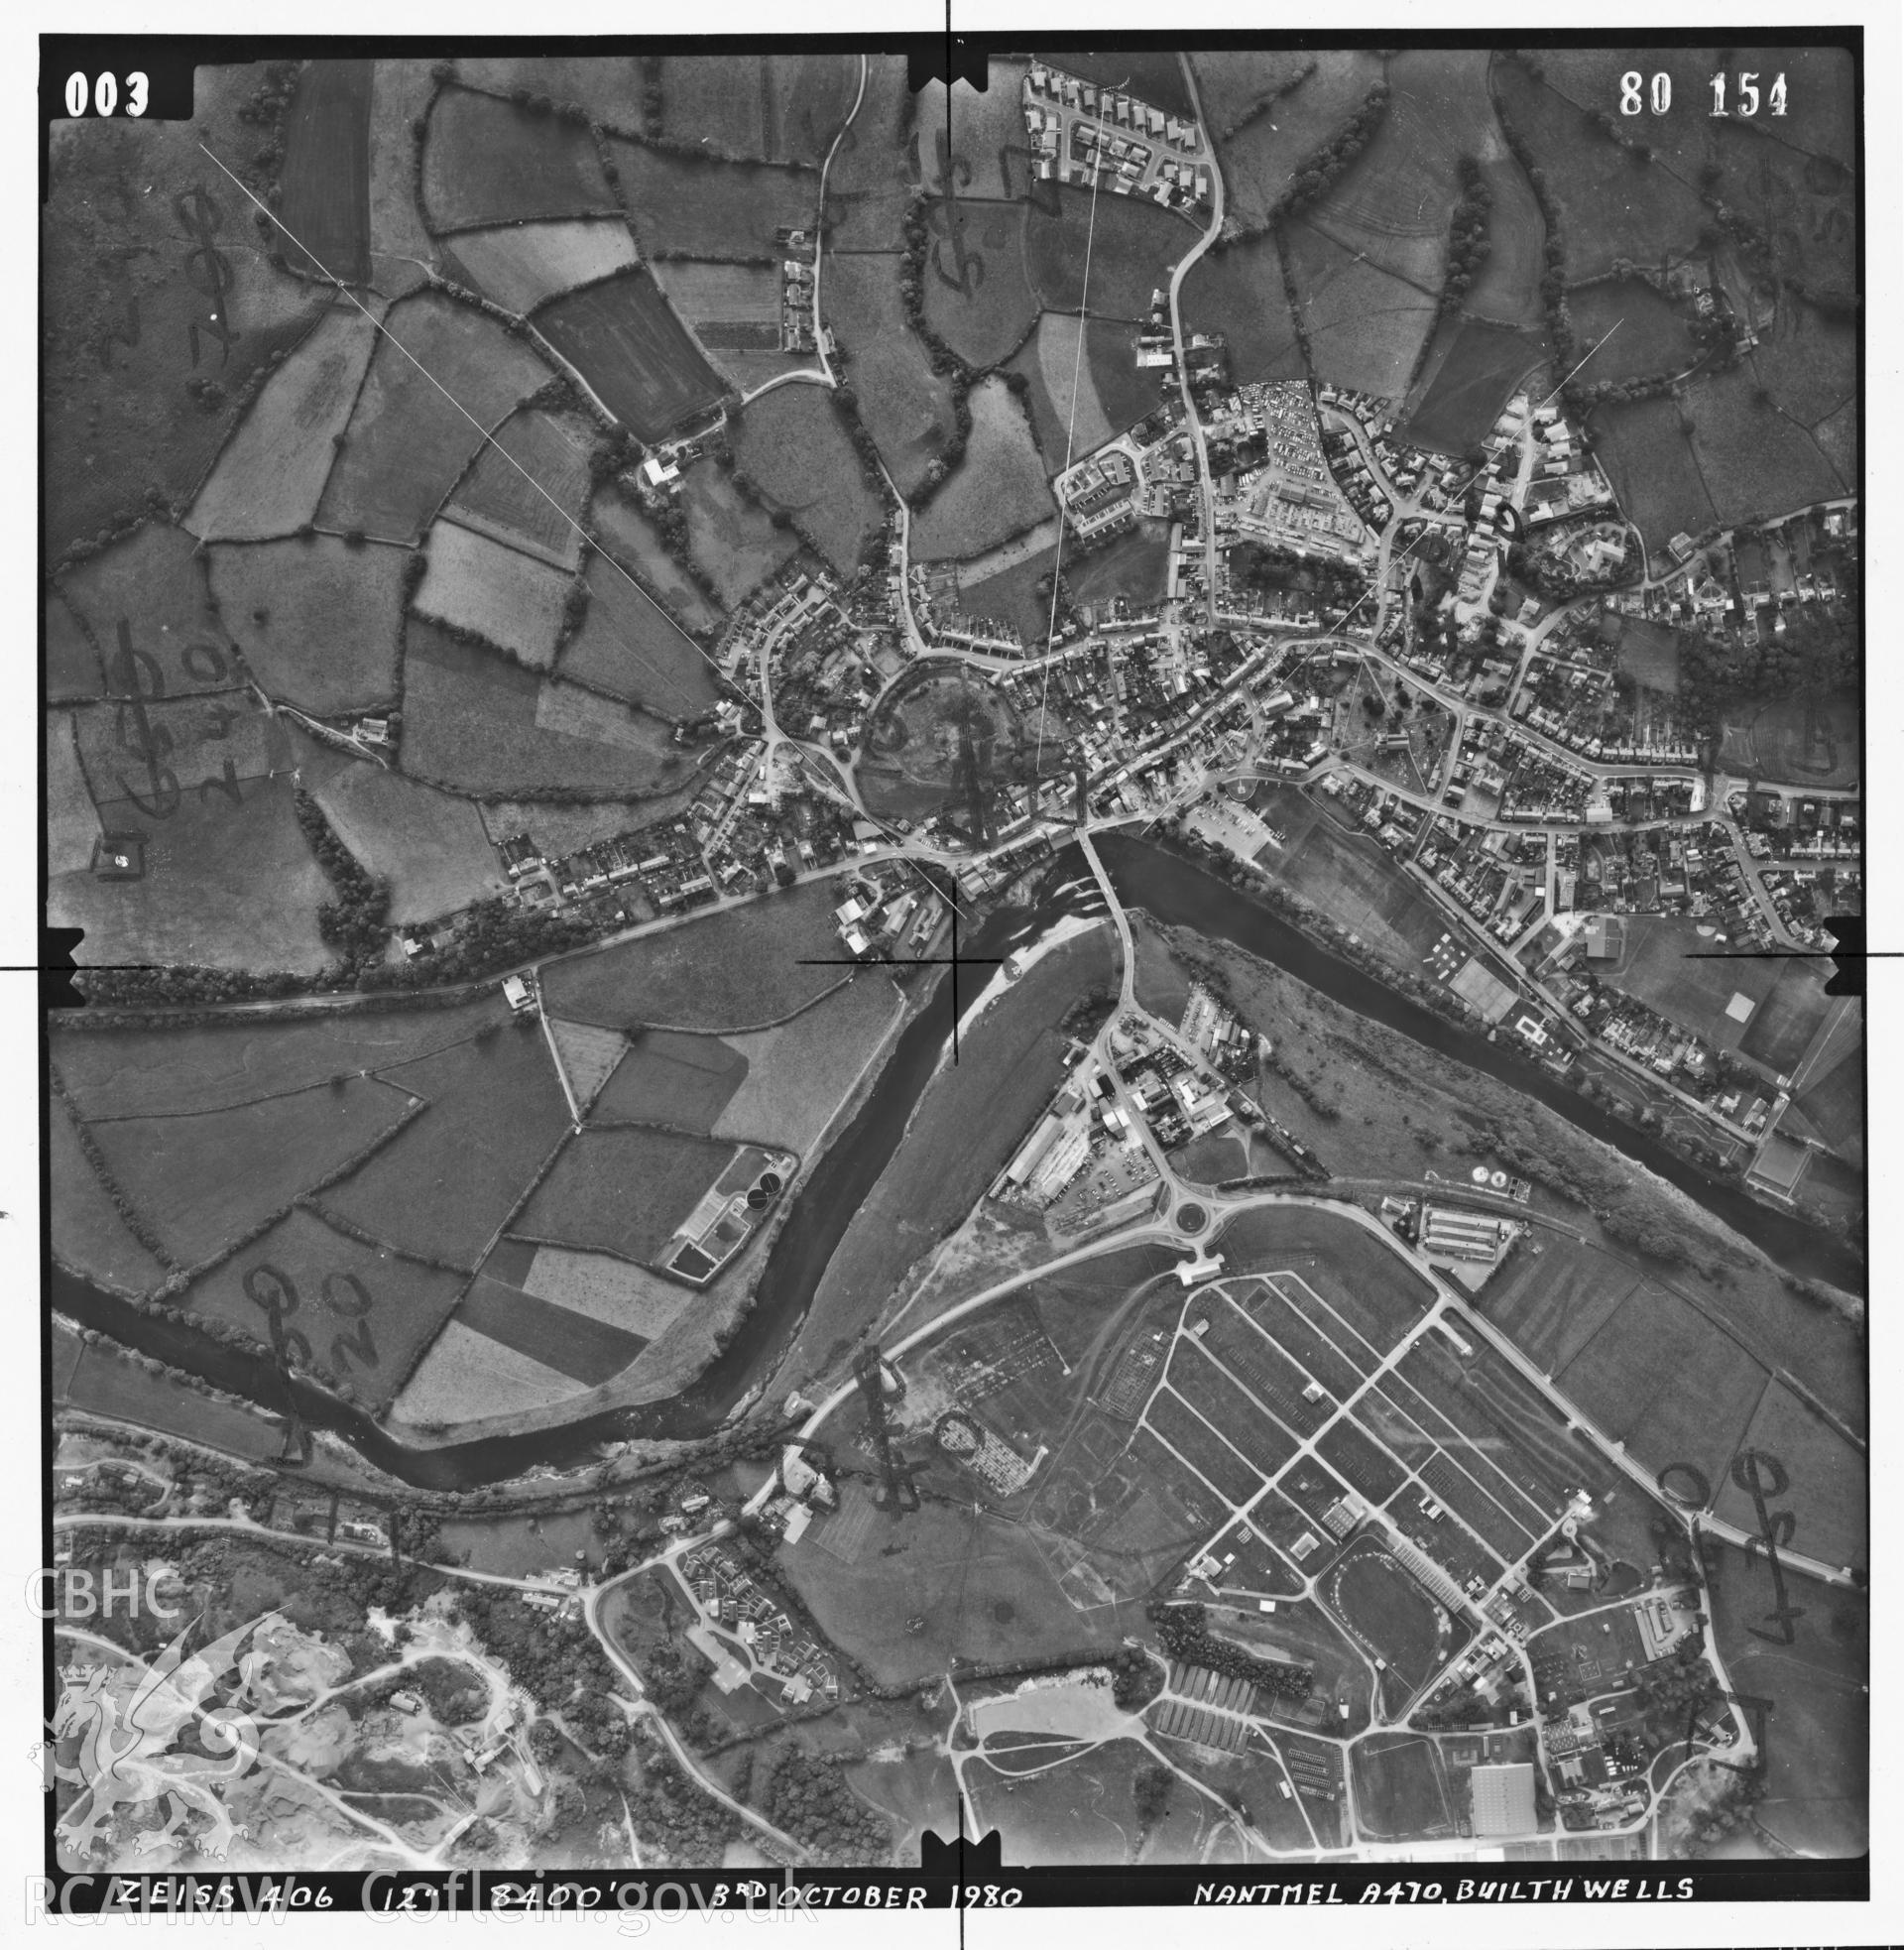 Digitized copy of an aerial photograph showing the Builth Wells area, taken by Ordnance Survey, 1980.